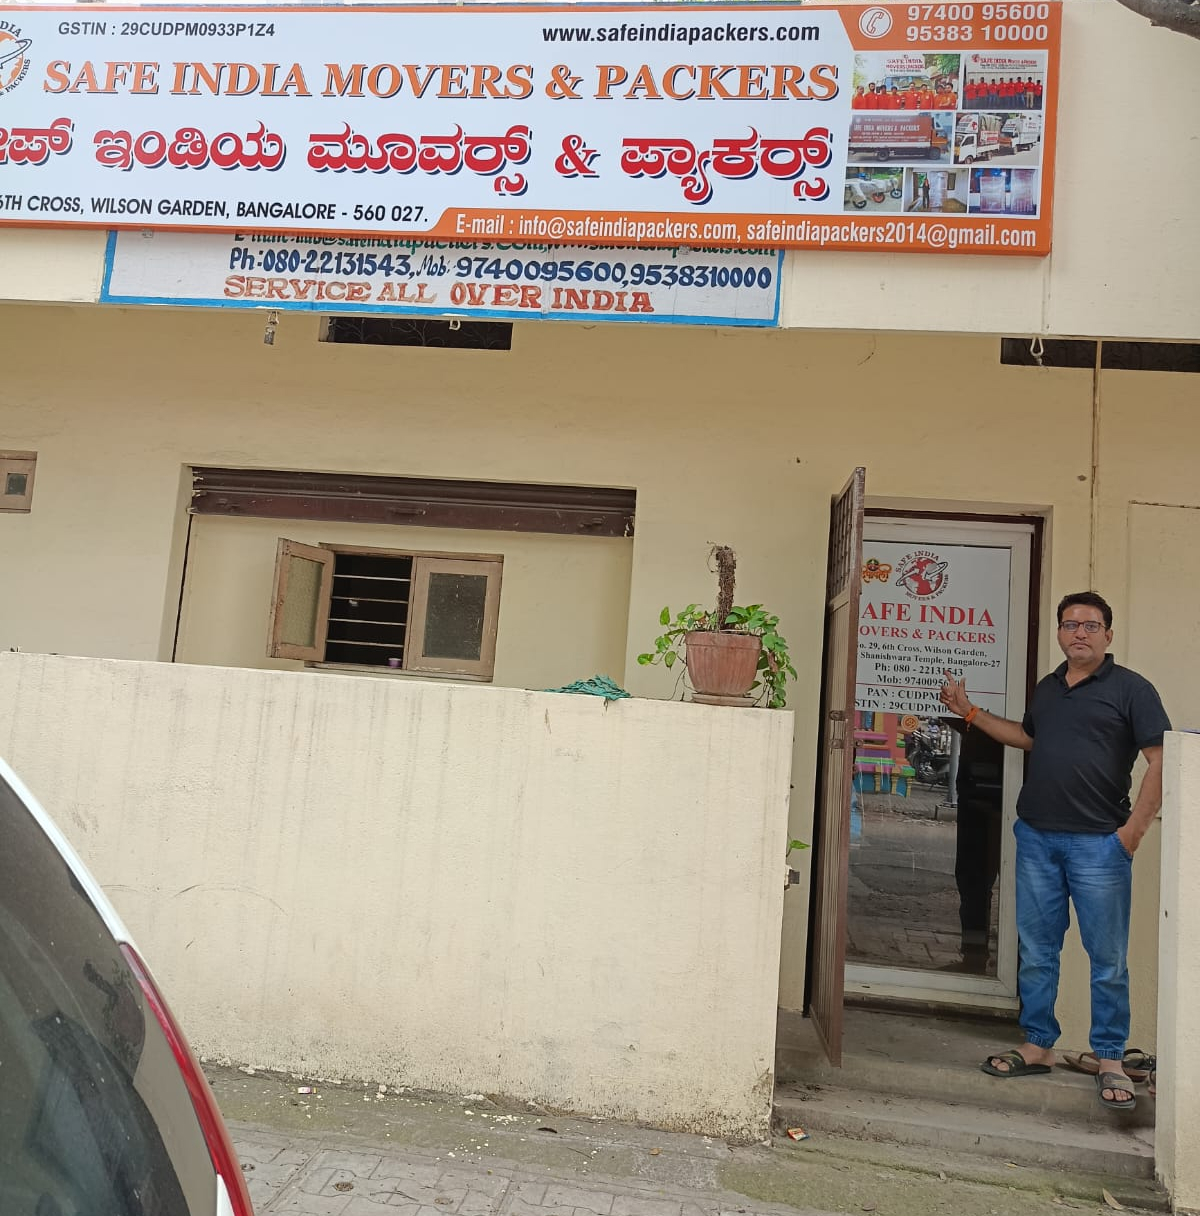 Safe india Movers And Packers are professional Movers and Packers